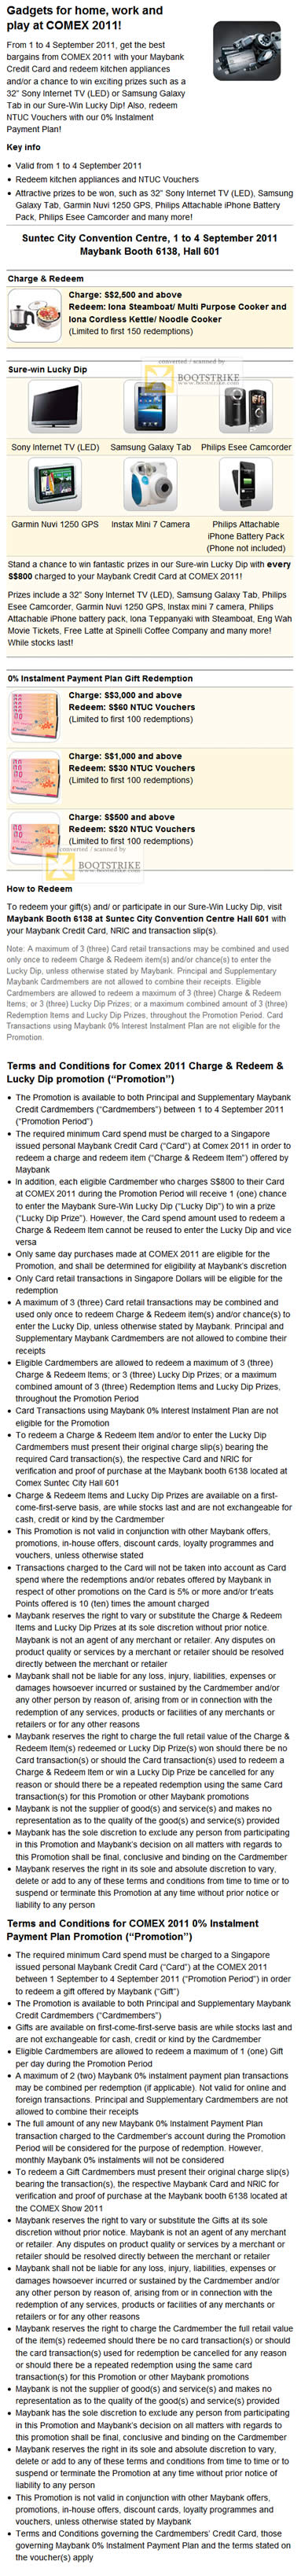 COMEX 2011 price list image brochure of Maybank Charge And Redeem, Sure Win Lucky Dip, Instalment Payment Plan Gift Redemption